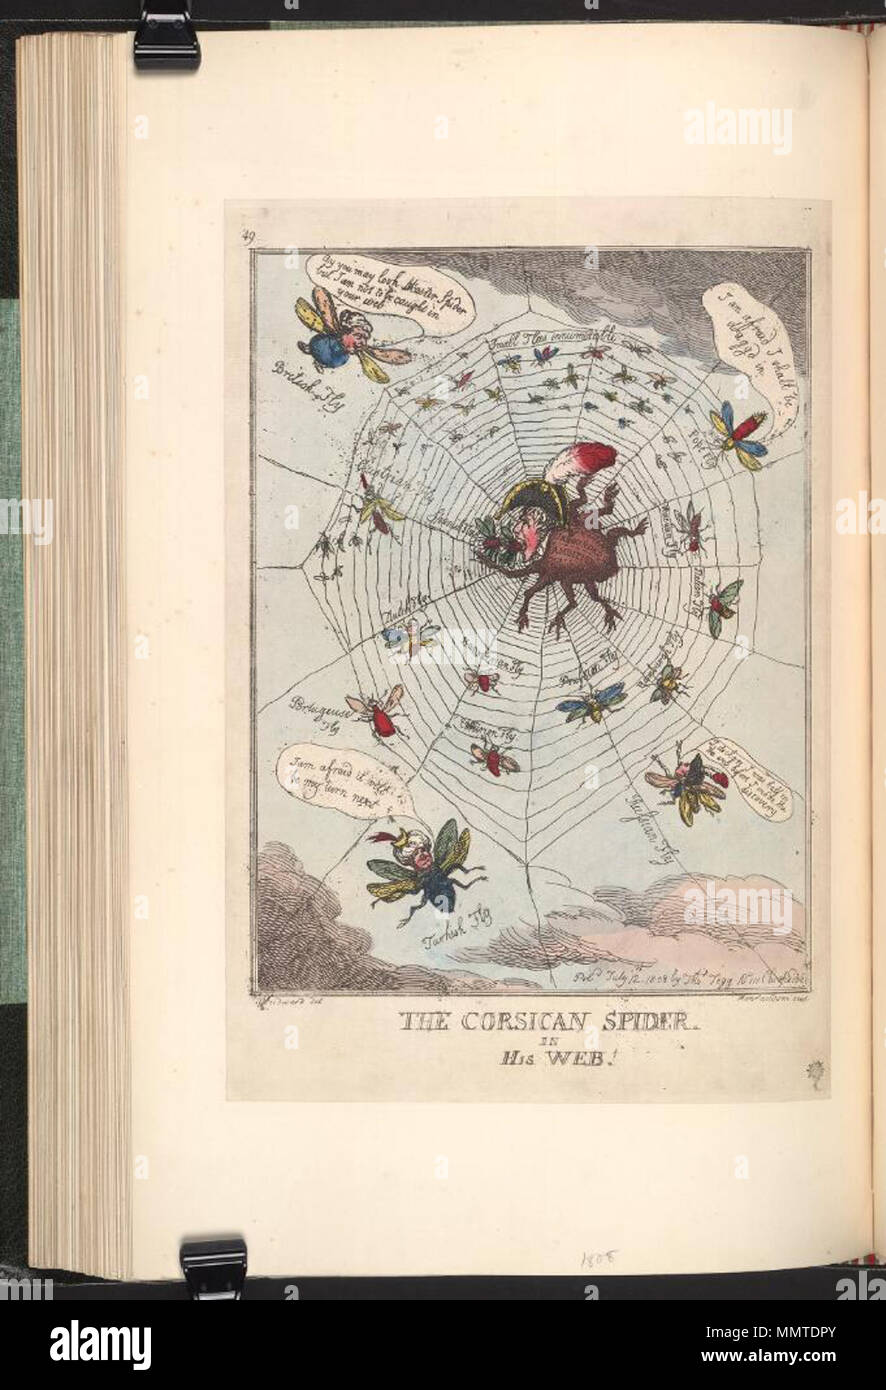 . Caricature of Napoleon I. (British political cartoon); Napoleon is a spider, labelled Unbounded Ambition, swallowing flies caught in his web, the countries of Europe. Only Britain, Turkey, Russia and the Pope remain partly free.; Publisher's number: 49  The Corsican spider in his web!. 12 July 1808. Bodleian Libraries, The Corsican spider in his web Stock Photo